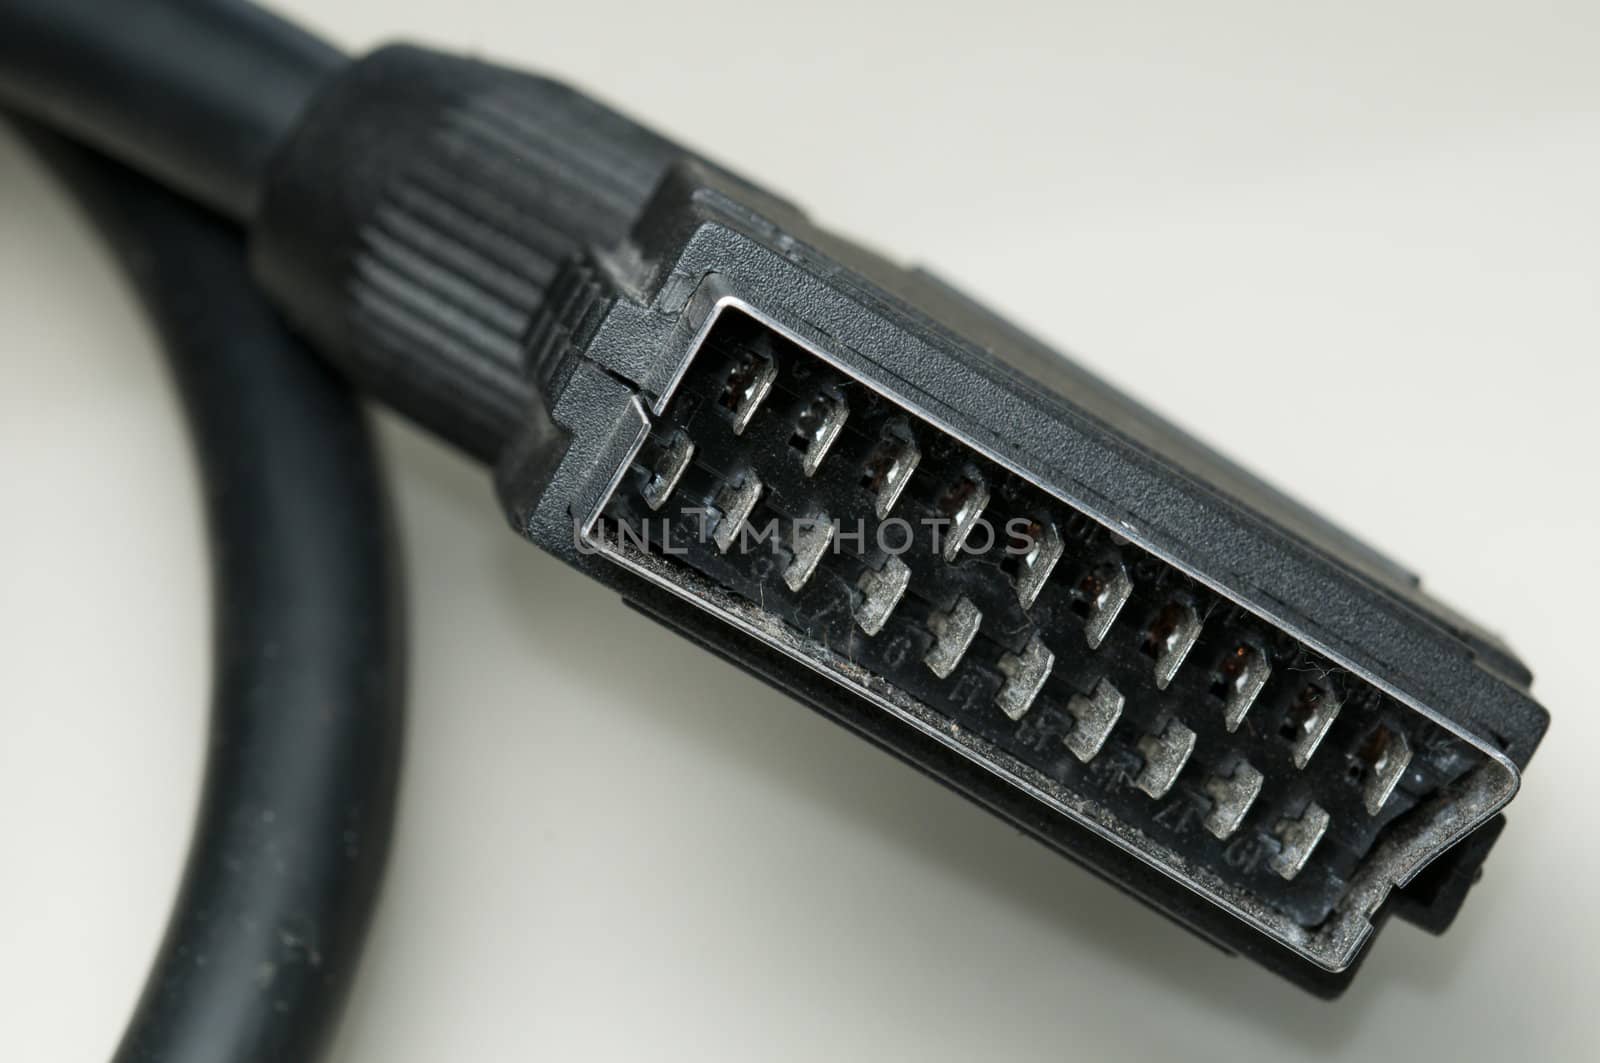 Close up of a SCART plug for video audio connection